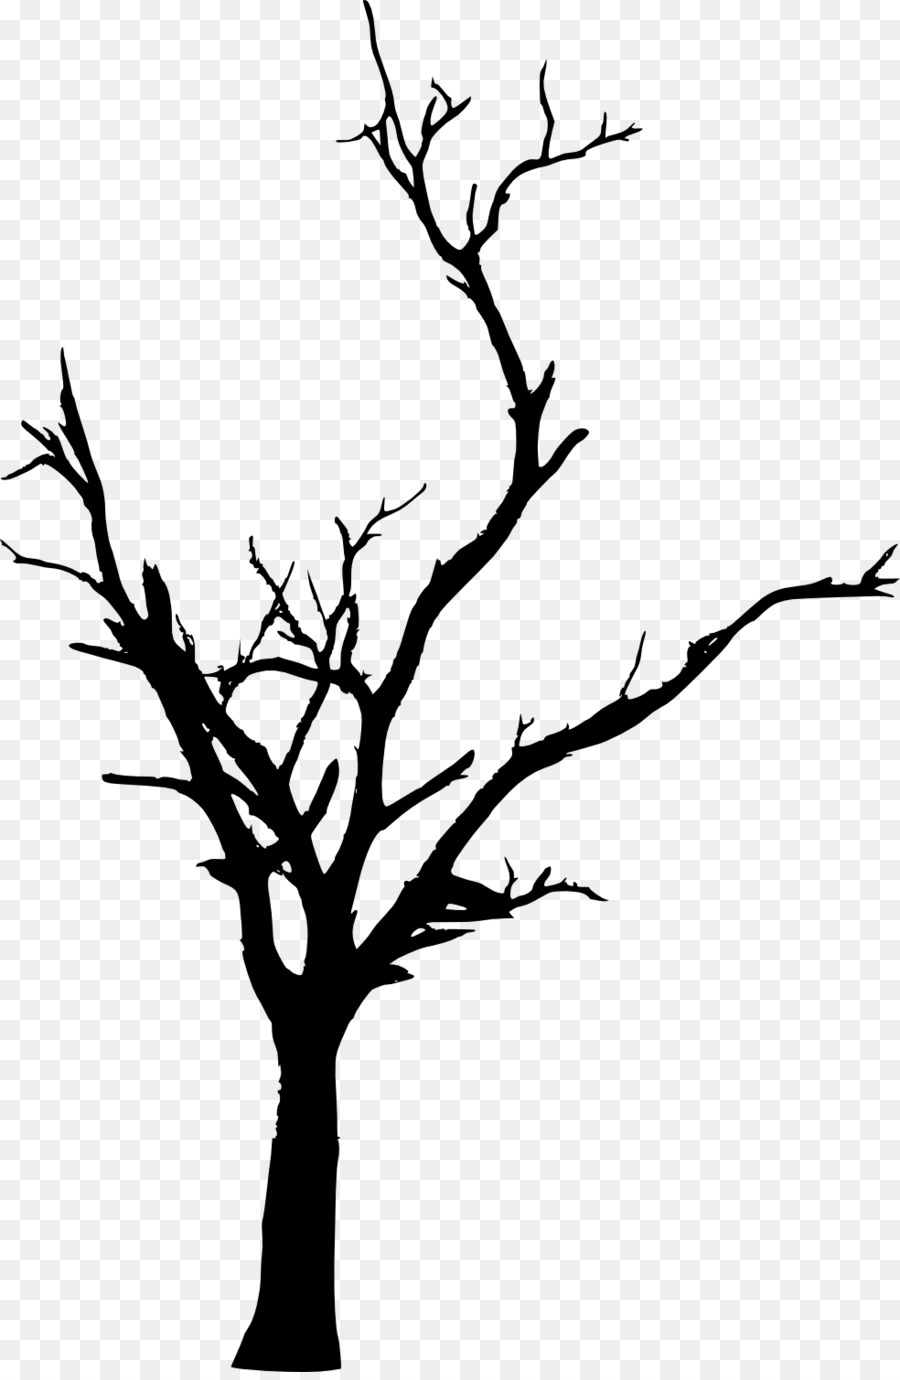 Tree Woody plant Branch Twig Clip art - dead tree png download - 984*1500 - Free Transparent Tree png Download.